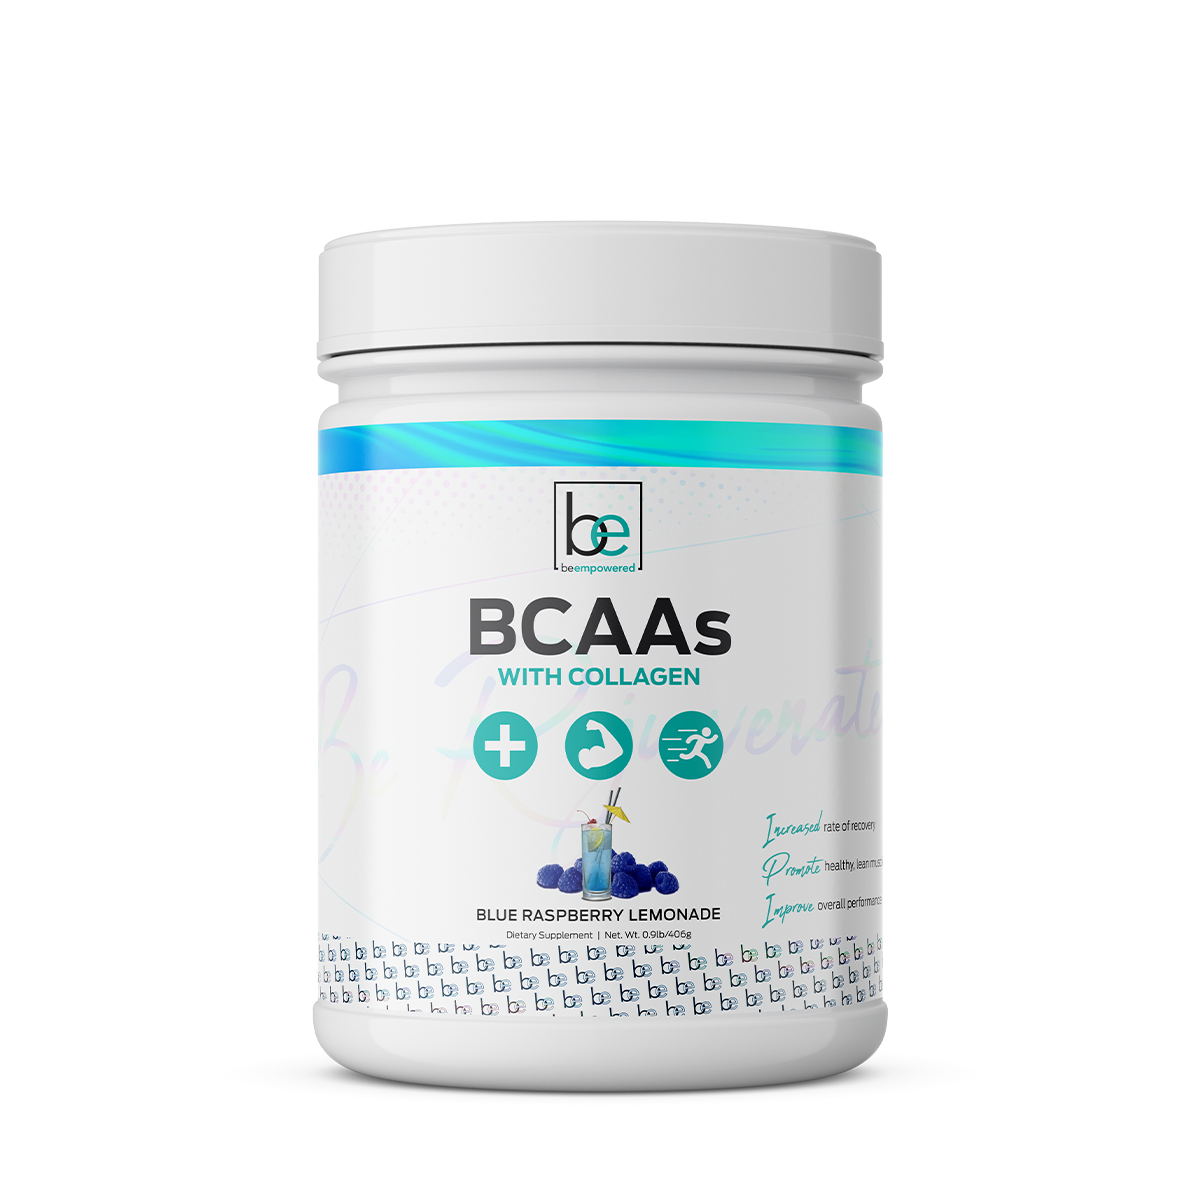 Image of BCAAs w/Collagen used for rebuilding muscle fibers after a workout.